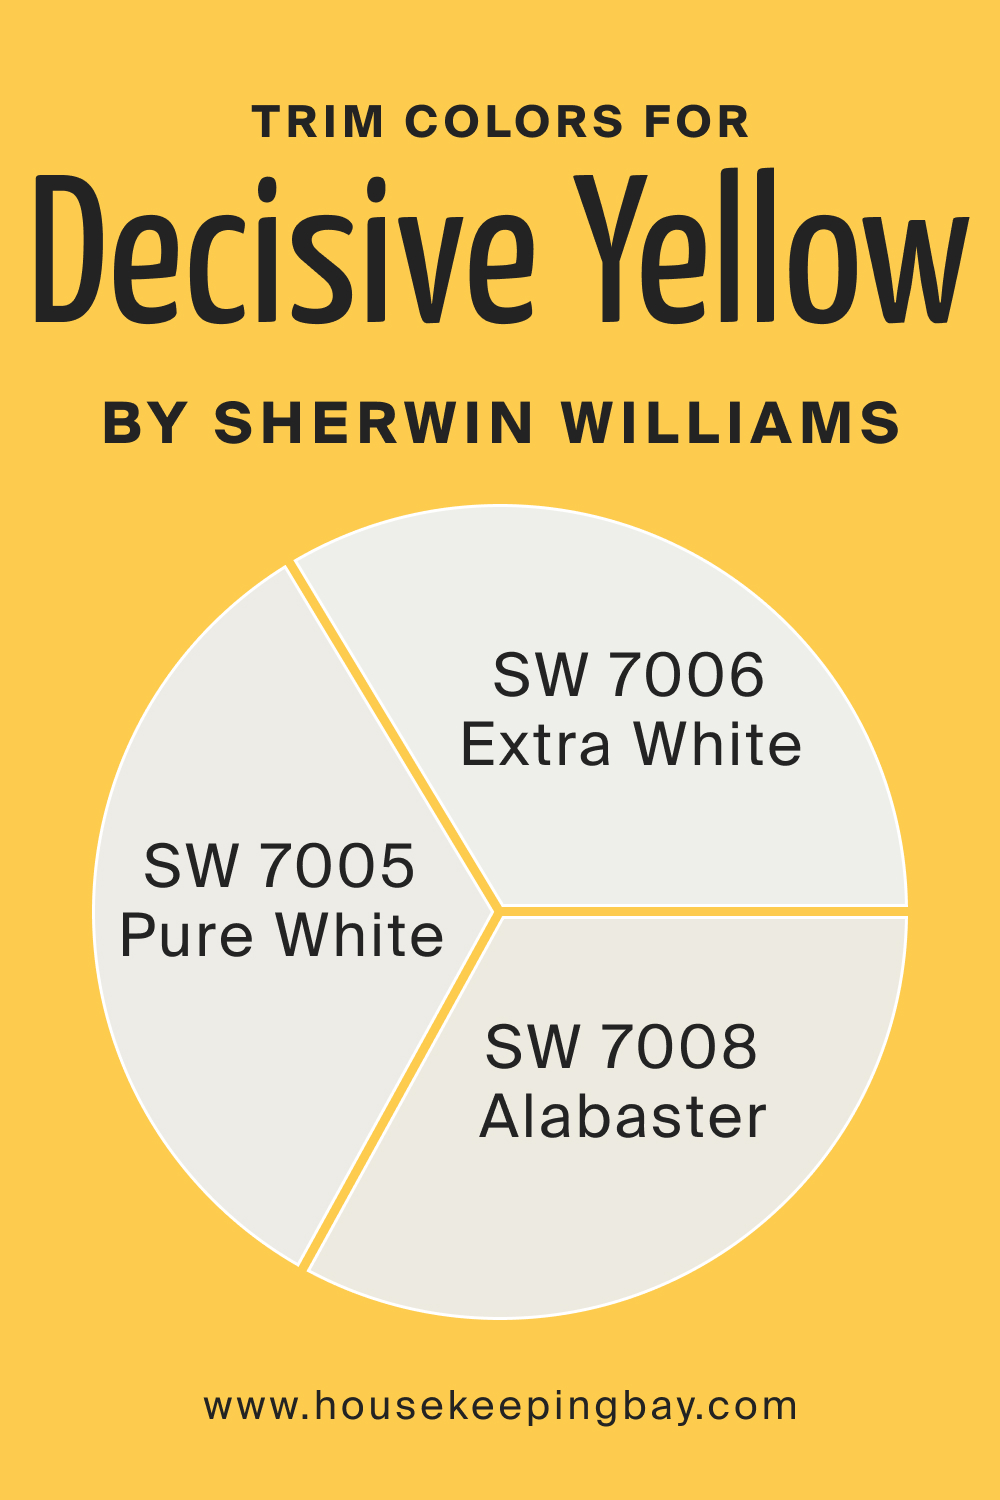 Trim Colors of Decisive Yellow SW 6902 by Sherwin Williams